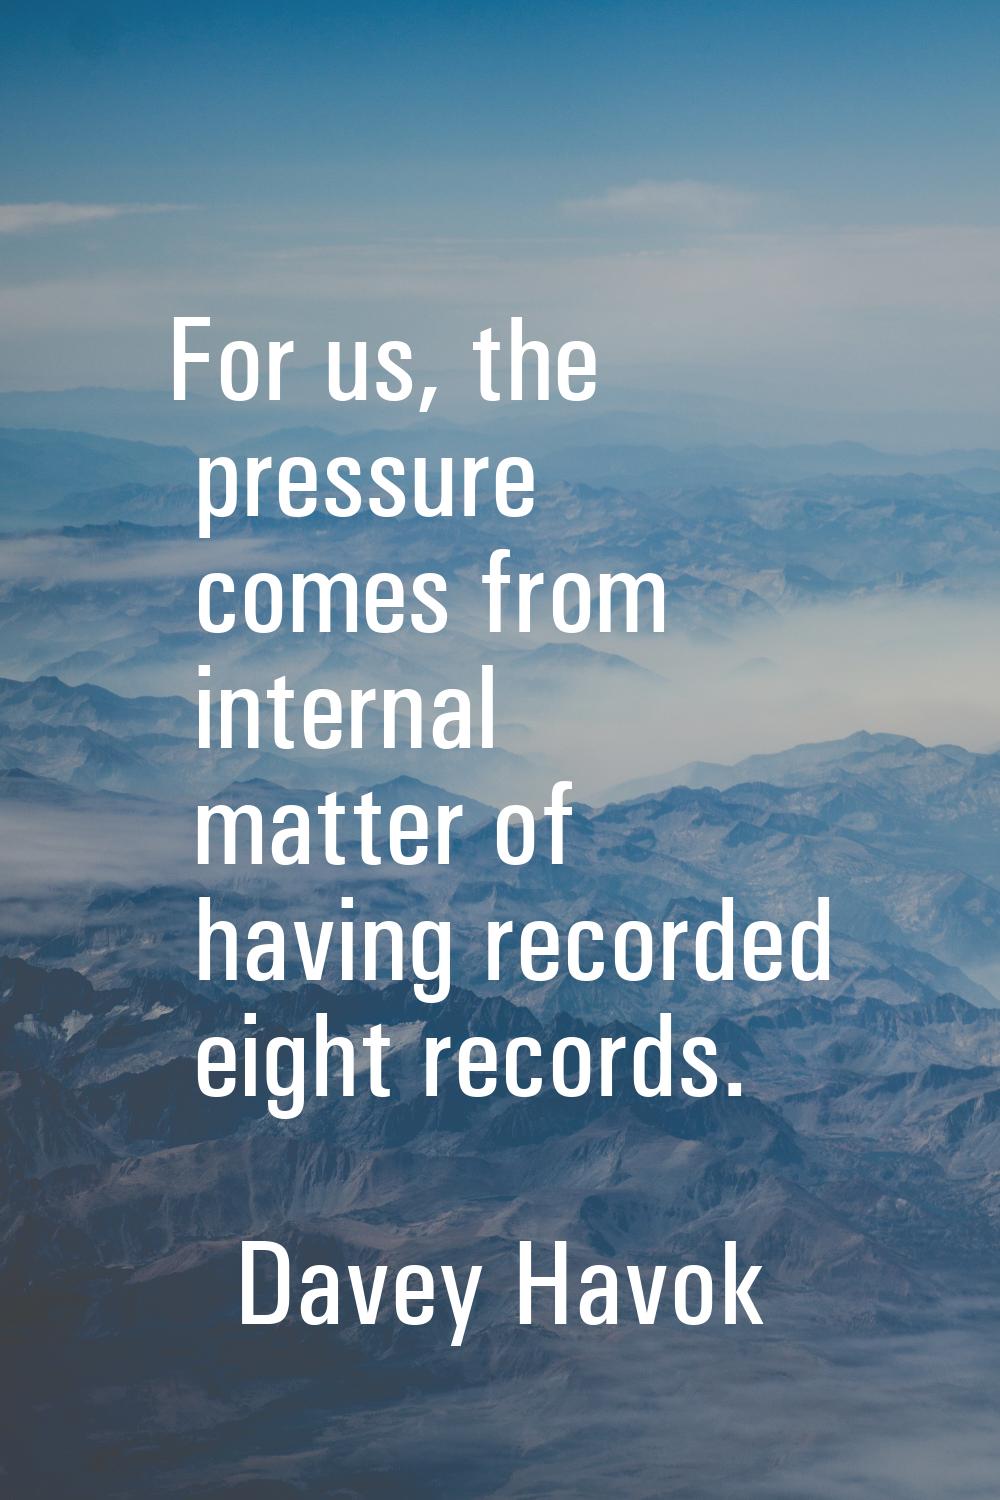 For us, the pressure comes from internal matter of having recorded eight records.